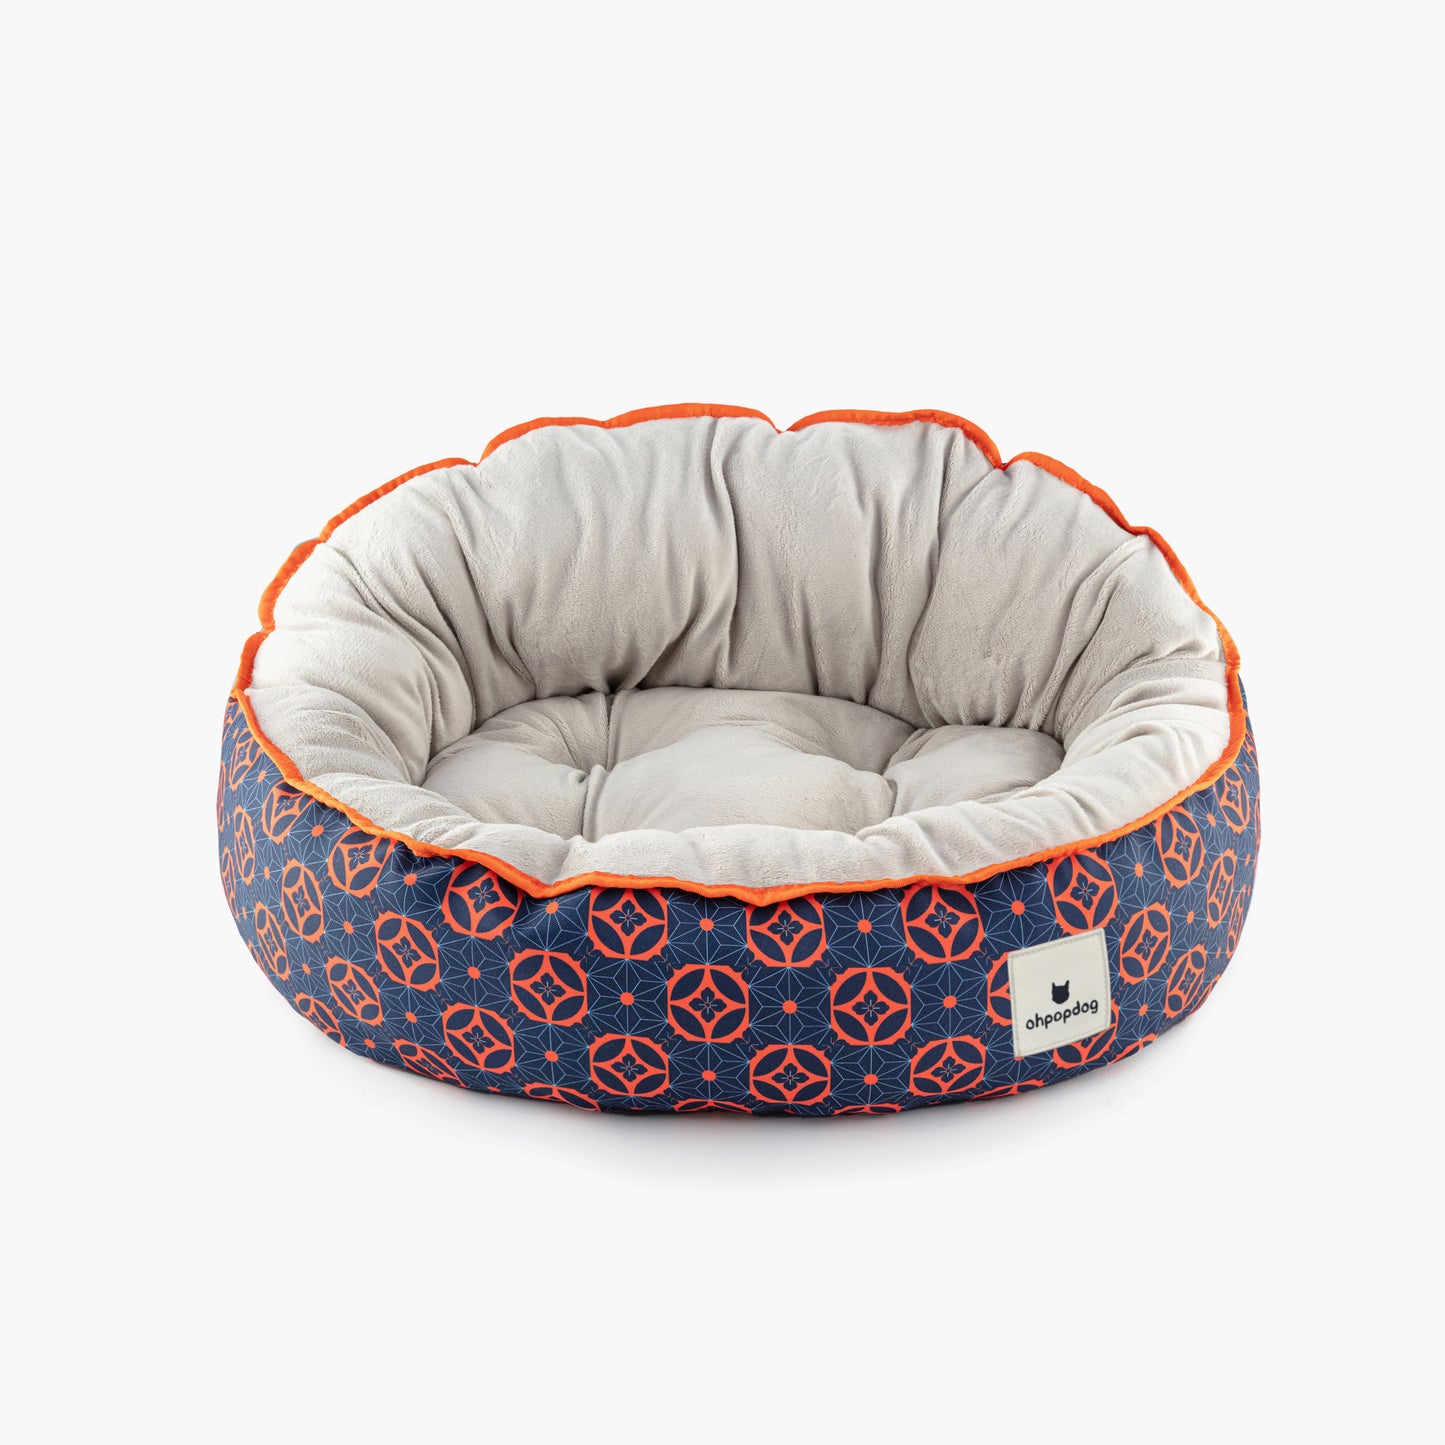 Reversible Bed - Baba Navy